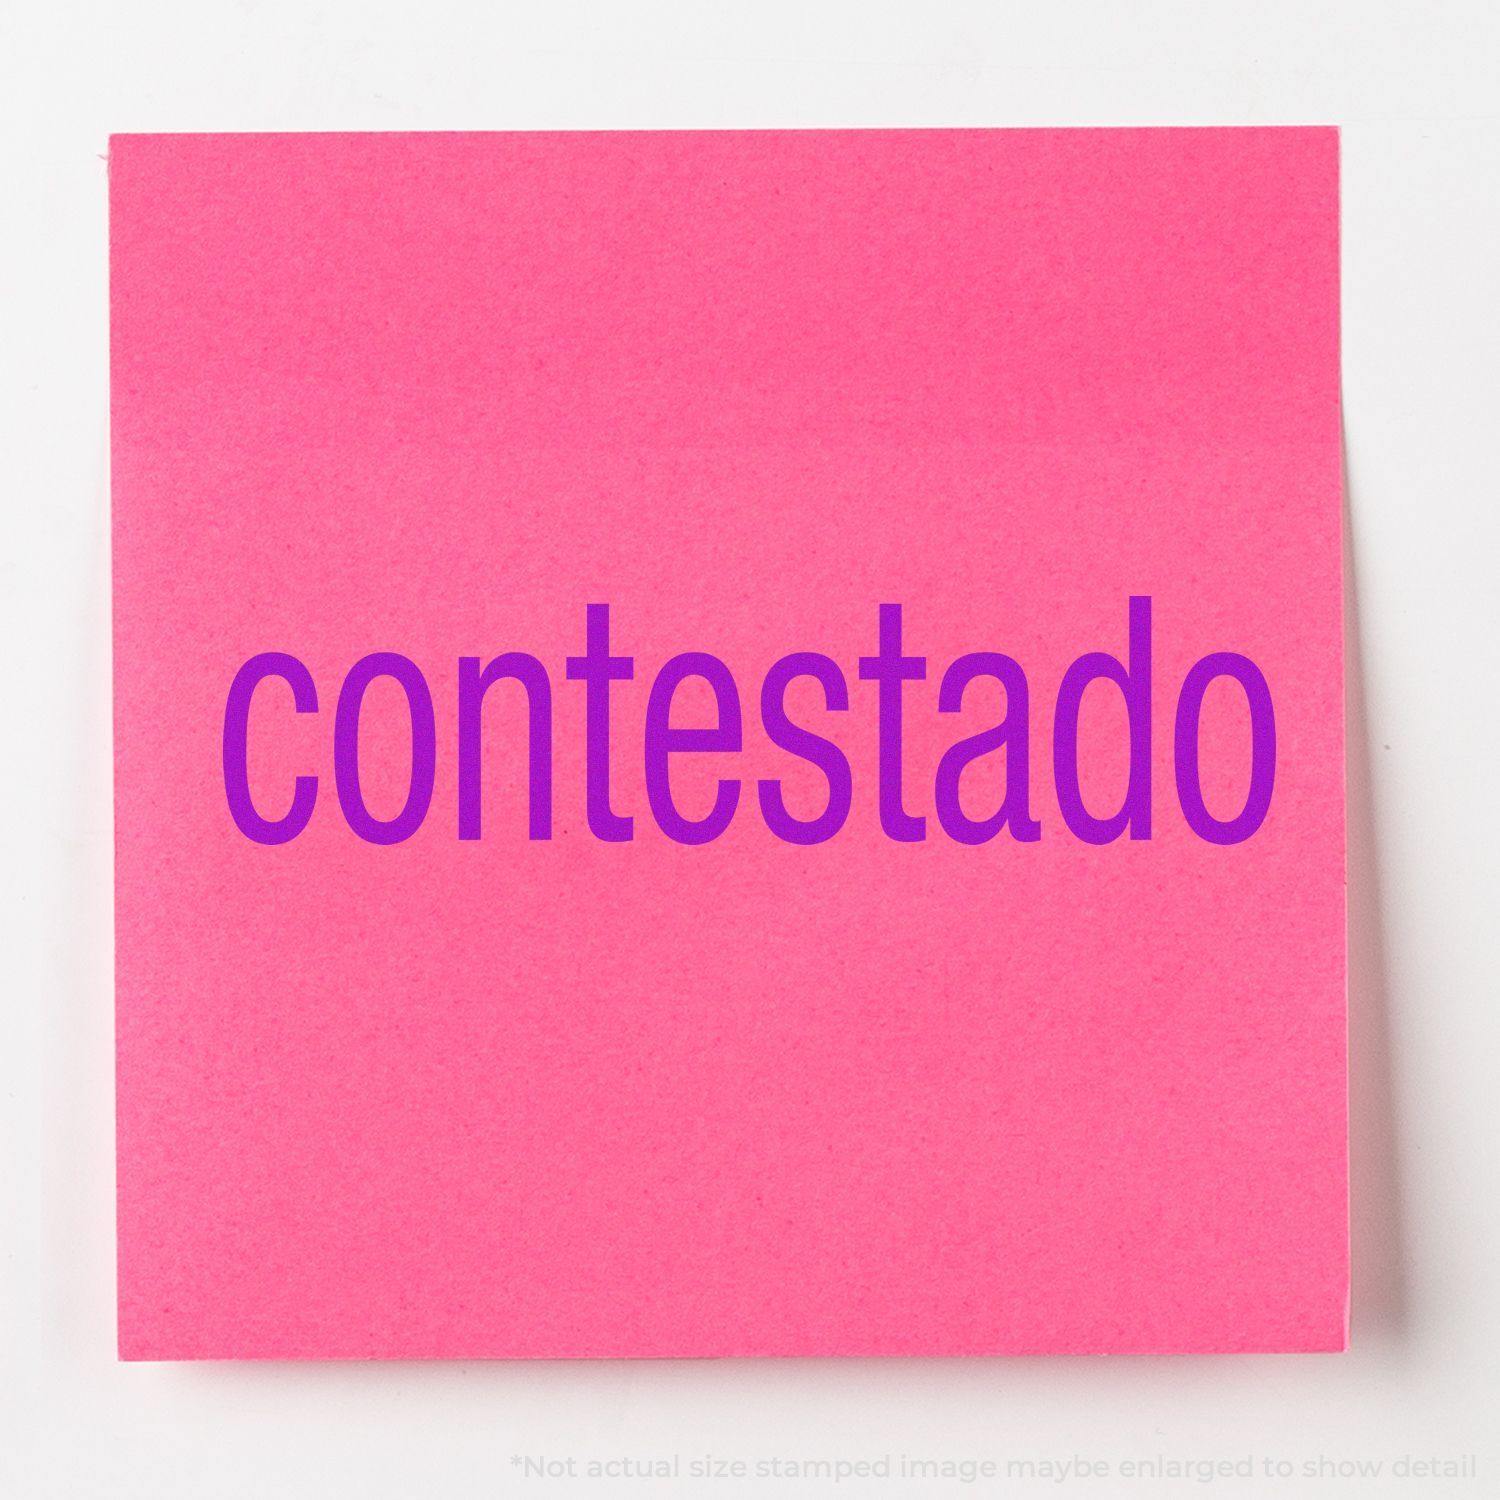 A stock office rubber stamp with a stamped image showing how the text "contestado" is displayed after stamping.